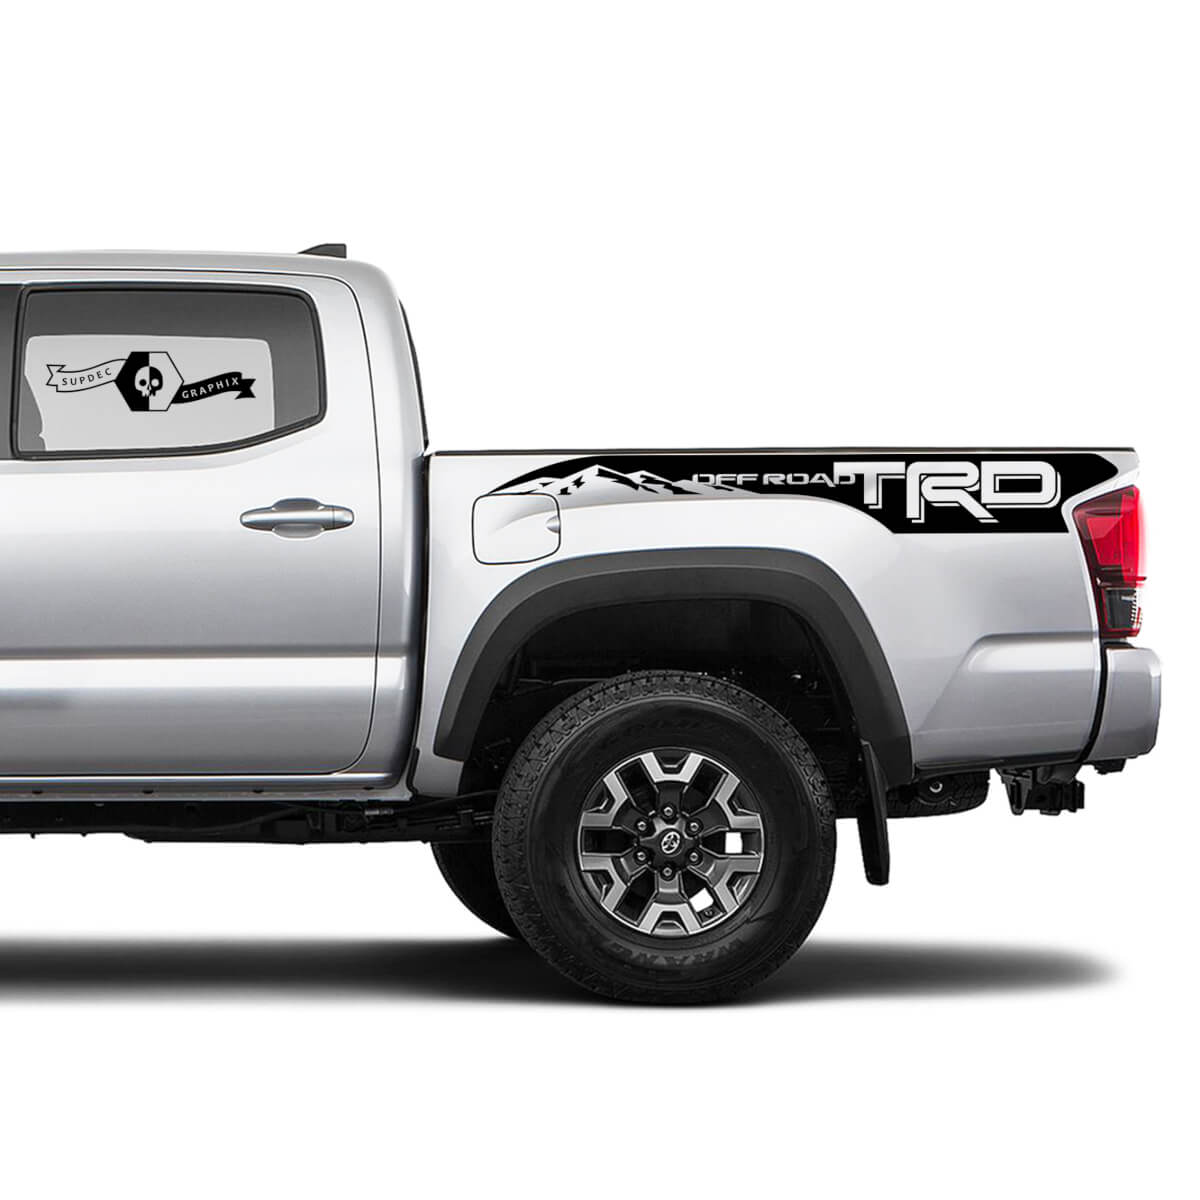 TRD off road Mountains Style for Side Truck Decals Stickers for Tacoma Tundra Hilux 4Runner